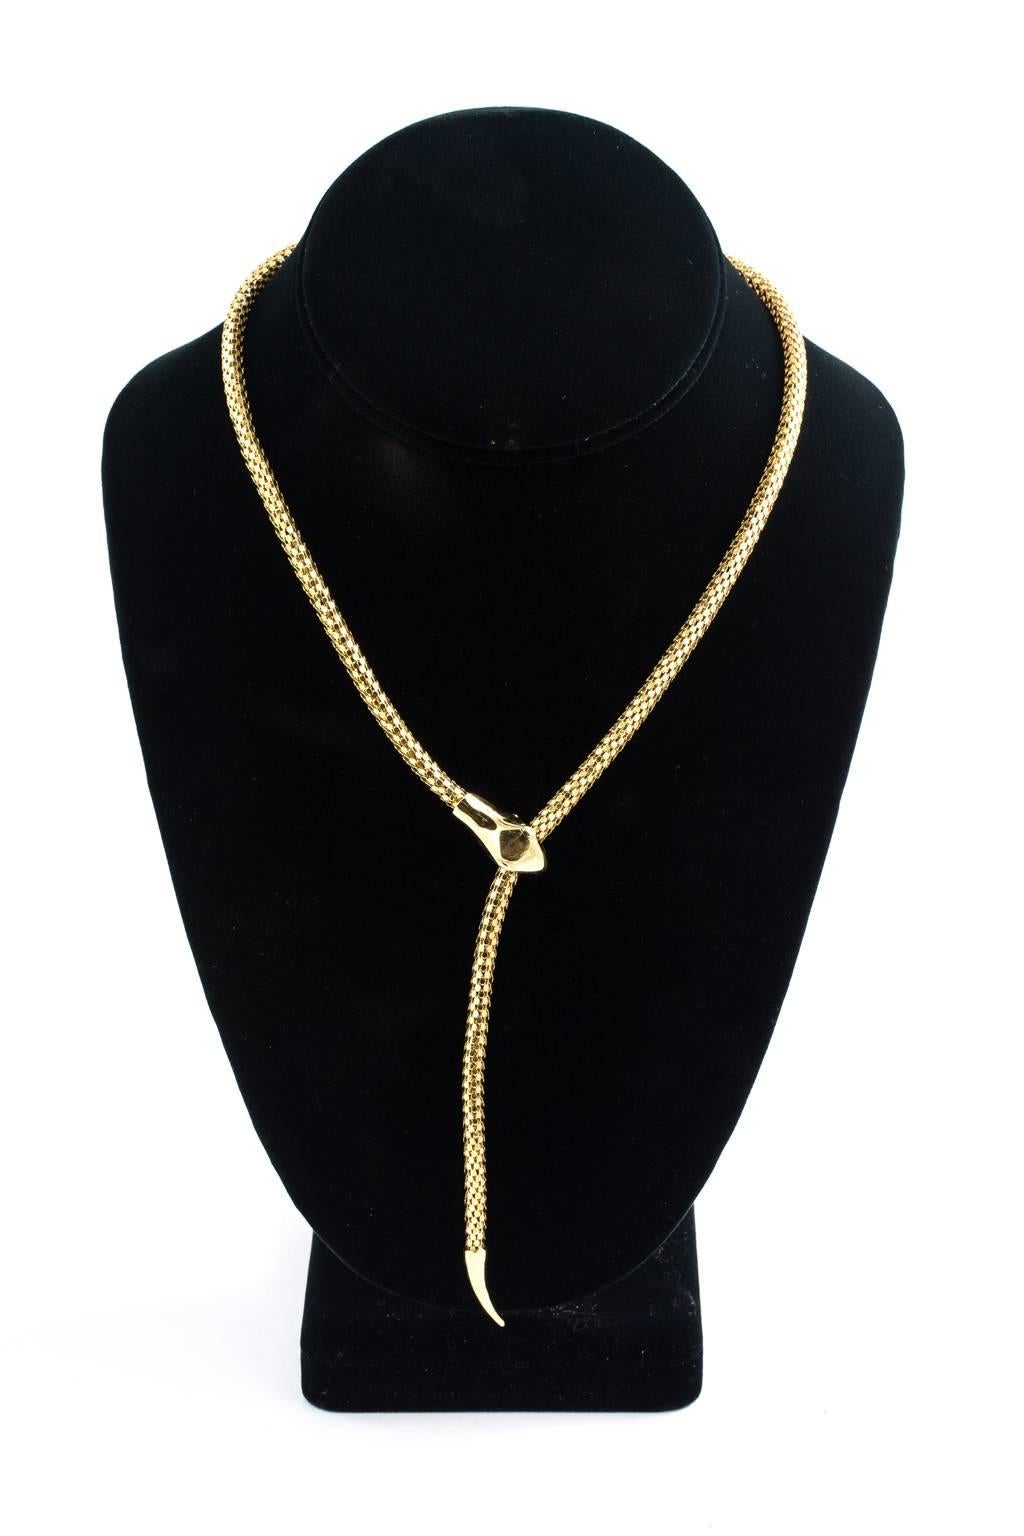 Charming mid-century serpent necklace. Adjusts from the head for the tail length. Hand articulated box mesh design. Snake jewelry is a symbol for good luck. Length-19.00 inches
MATERIALS:Gold
